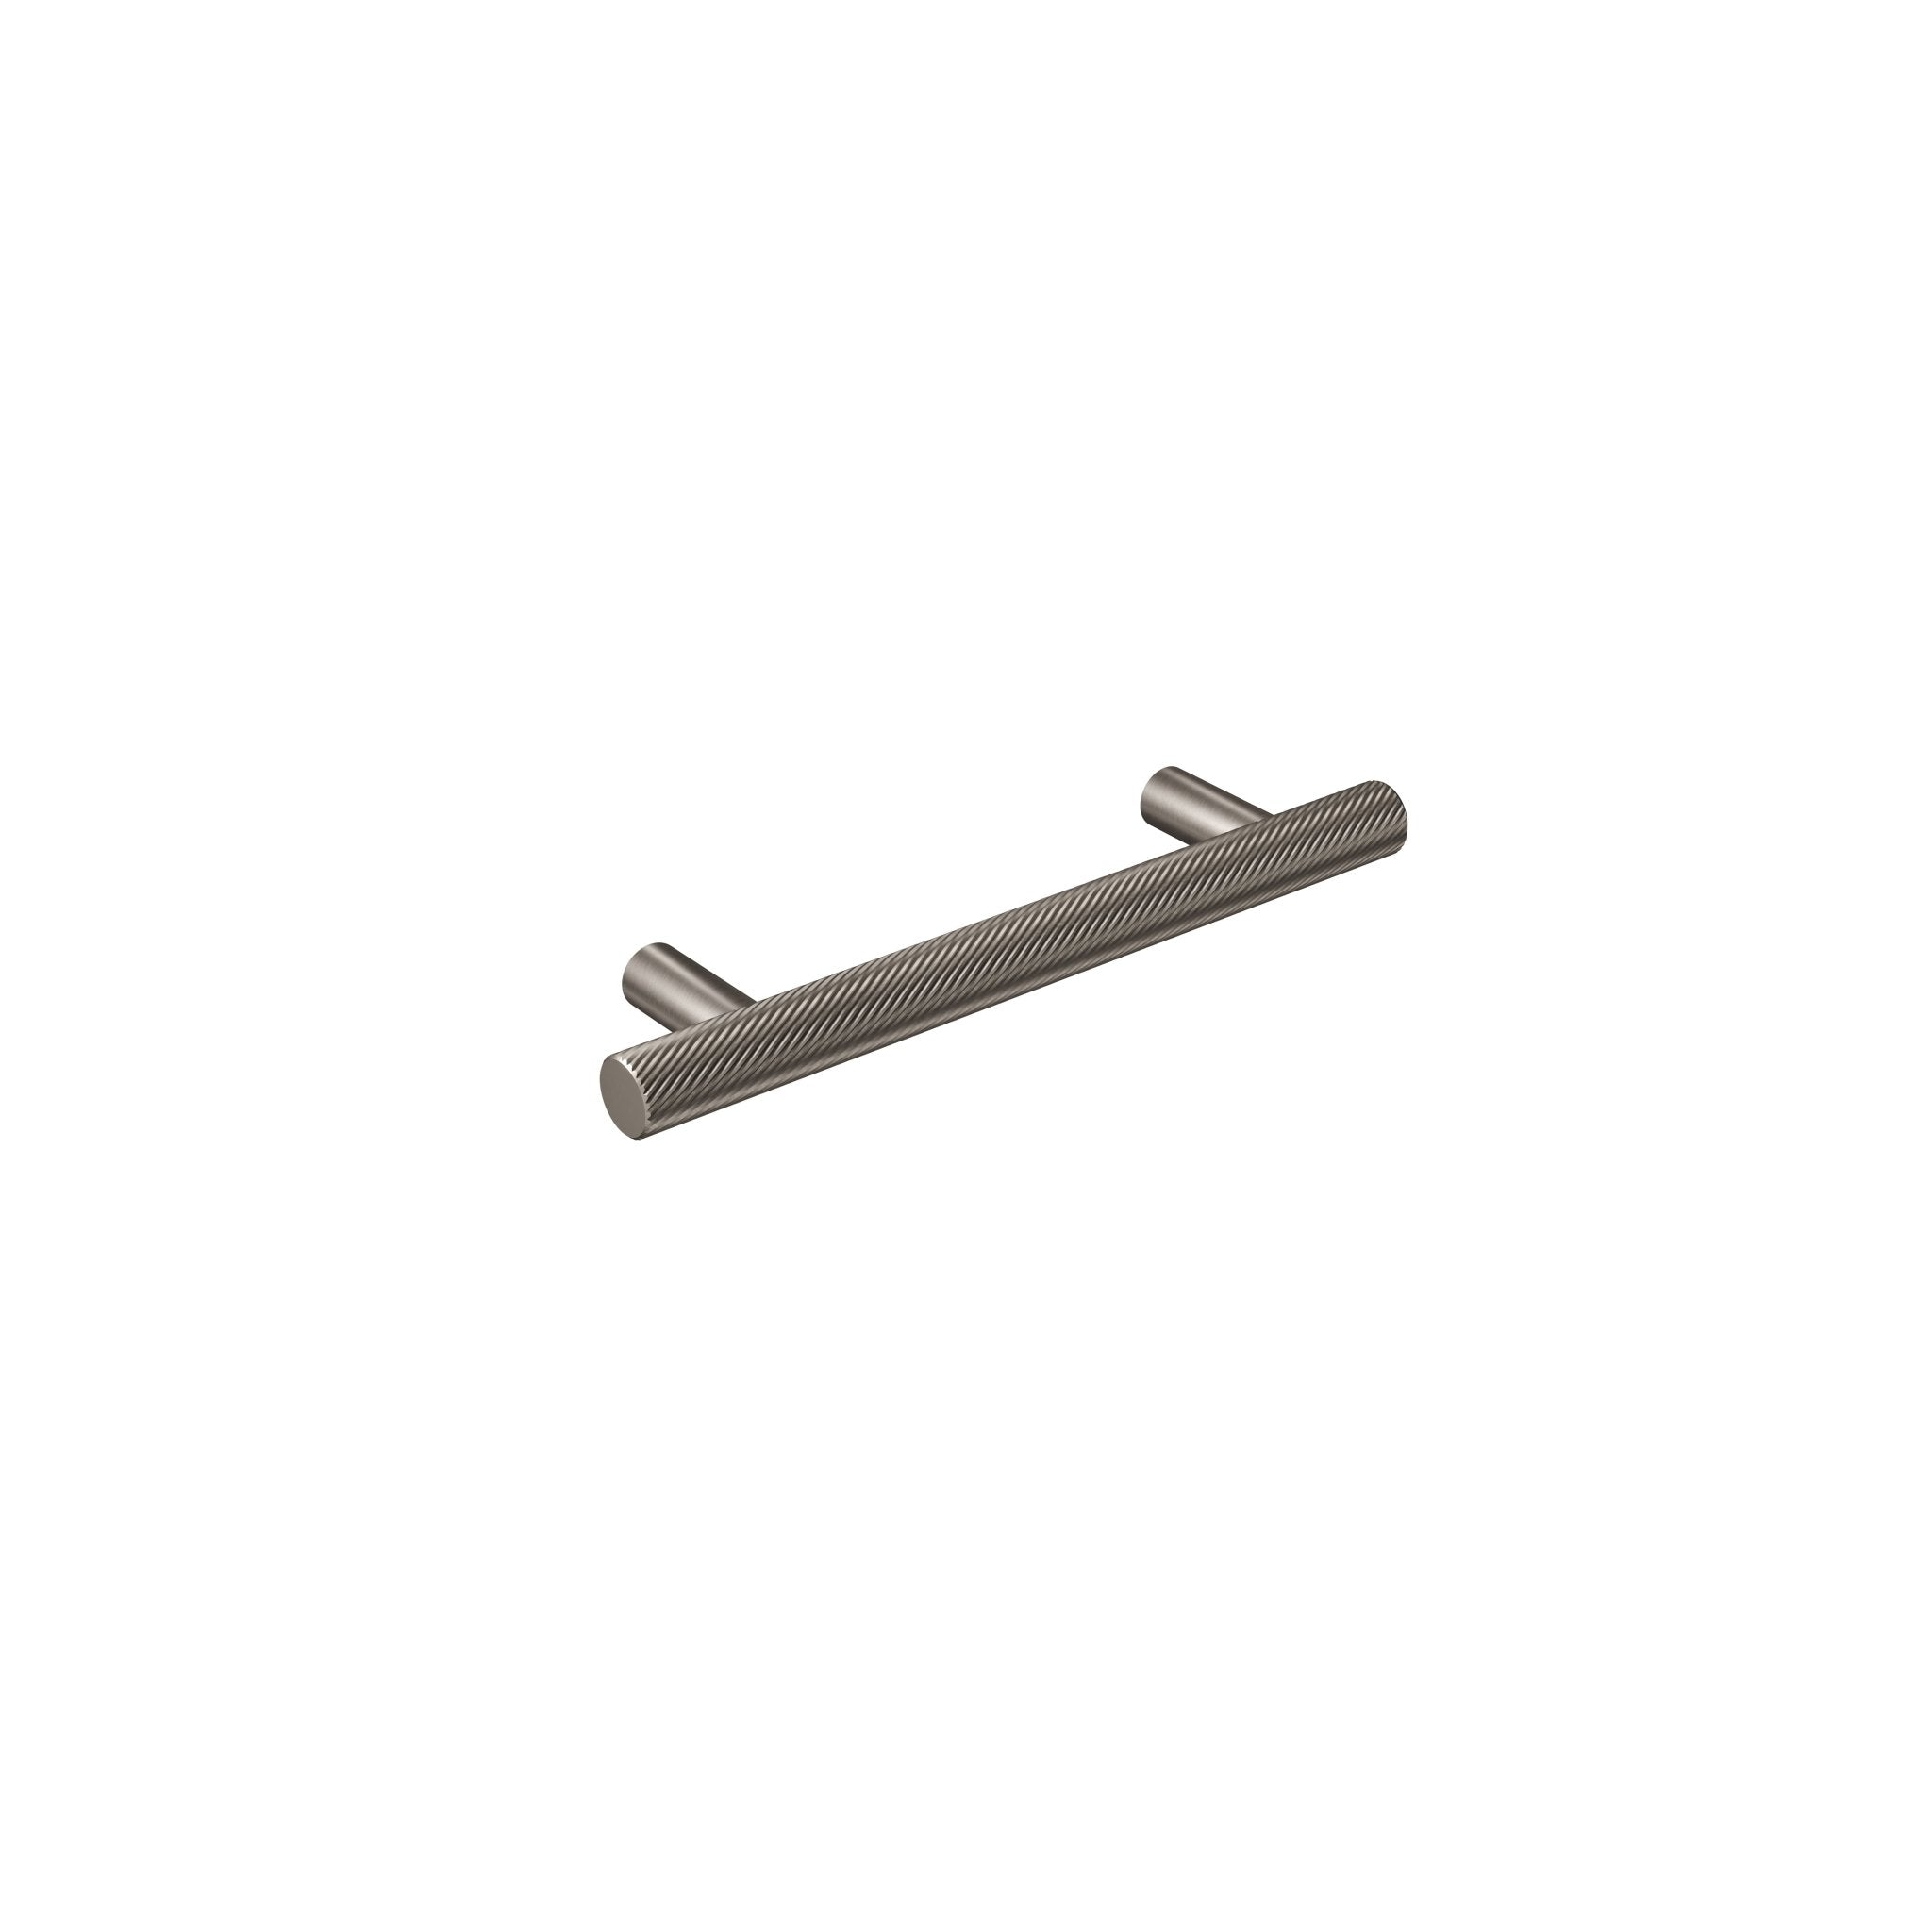 Spiral 12mm Pull Handle-Industrial Nickel-140mm-The Hairpin Leg Co.